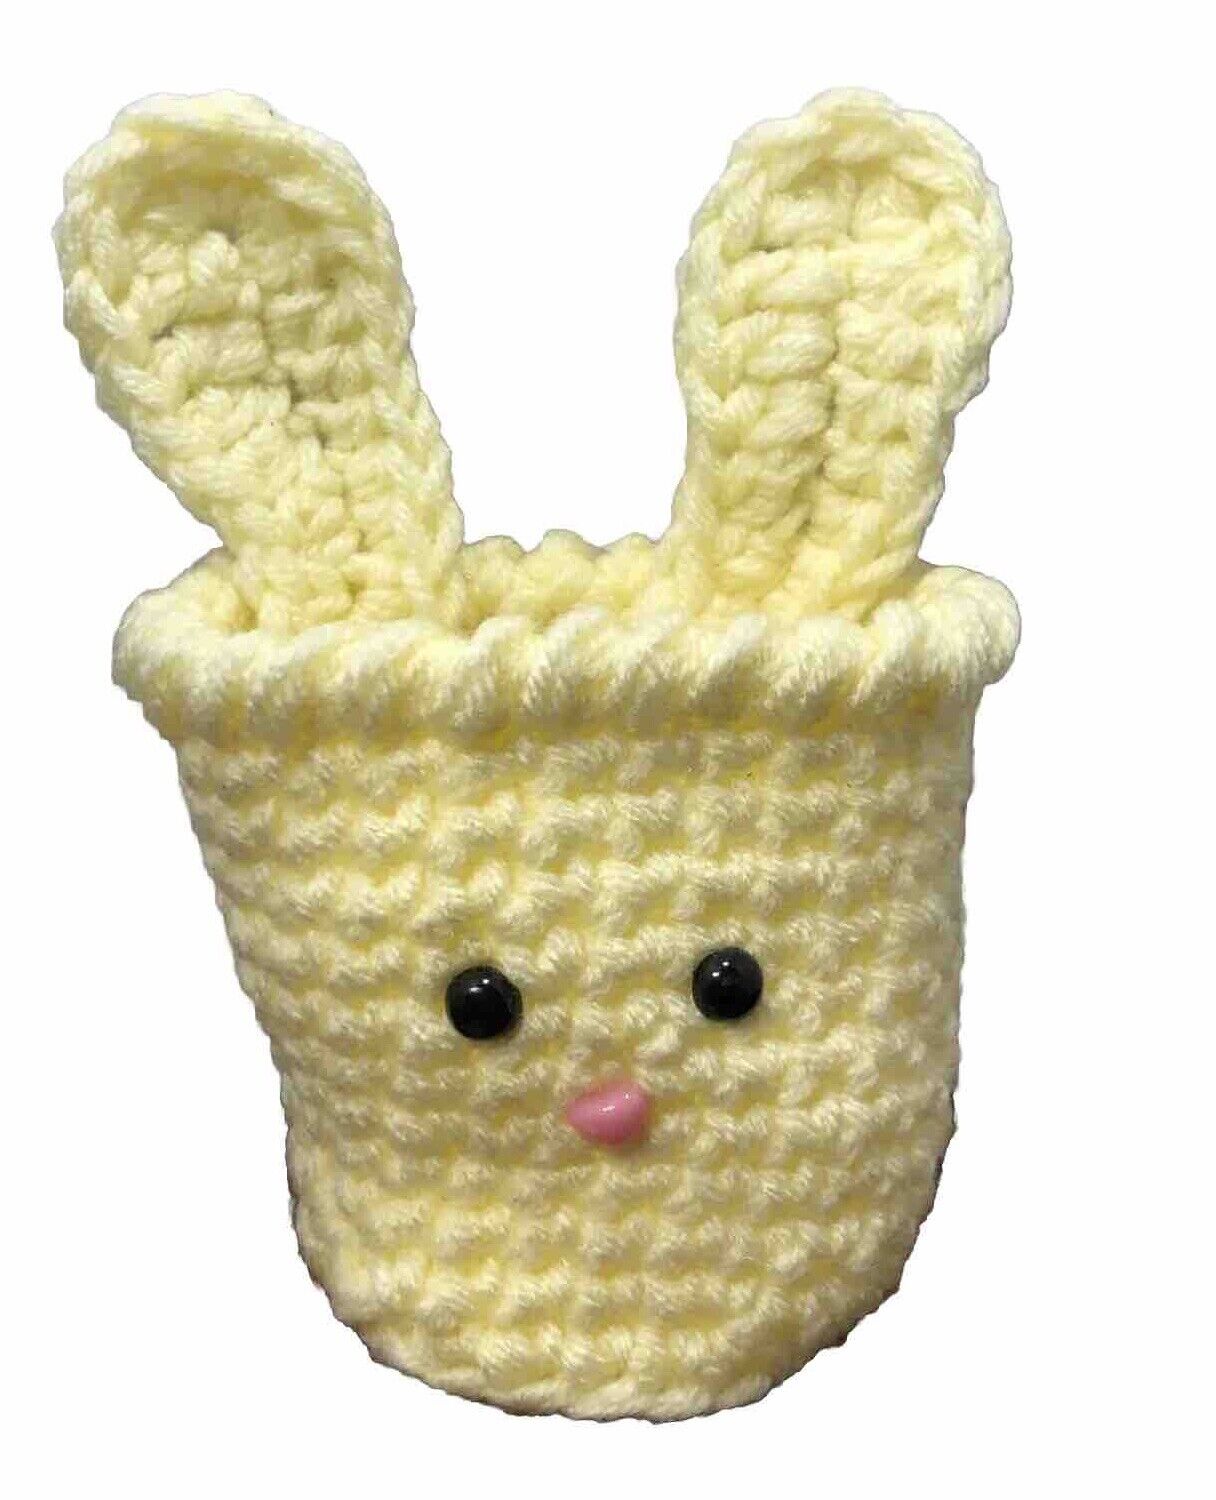 Vintage Easter Bunny Yellow Knitted Crocheted Candy Eggs Plant Grandma Core 6”